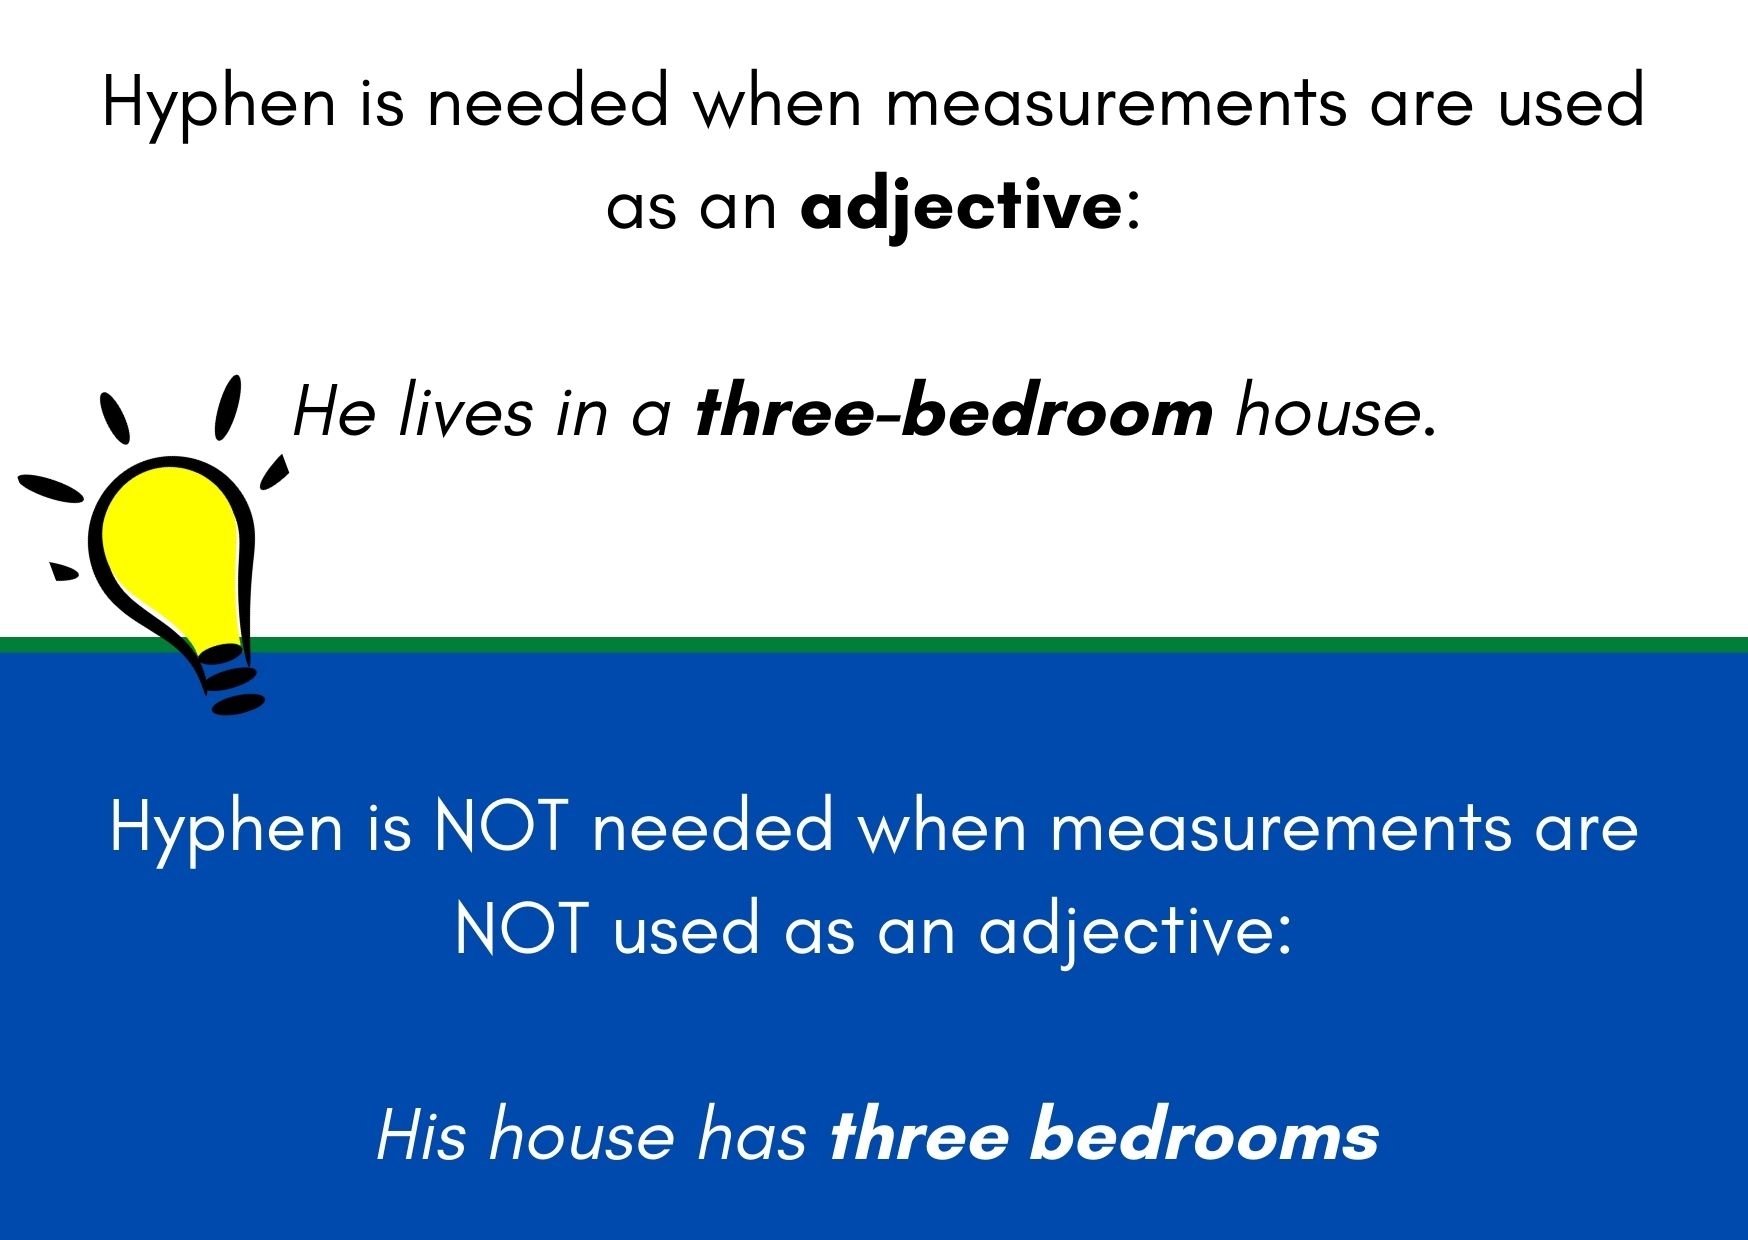 Explanation of how to hyphenate numbers when they are used as adjectives (hyphen is needed) and when they are not (no hyphen)